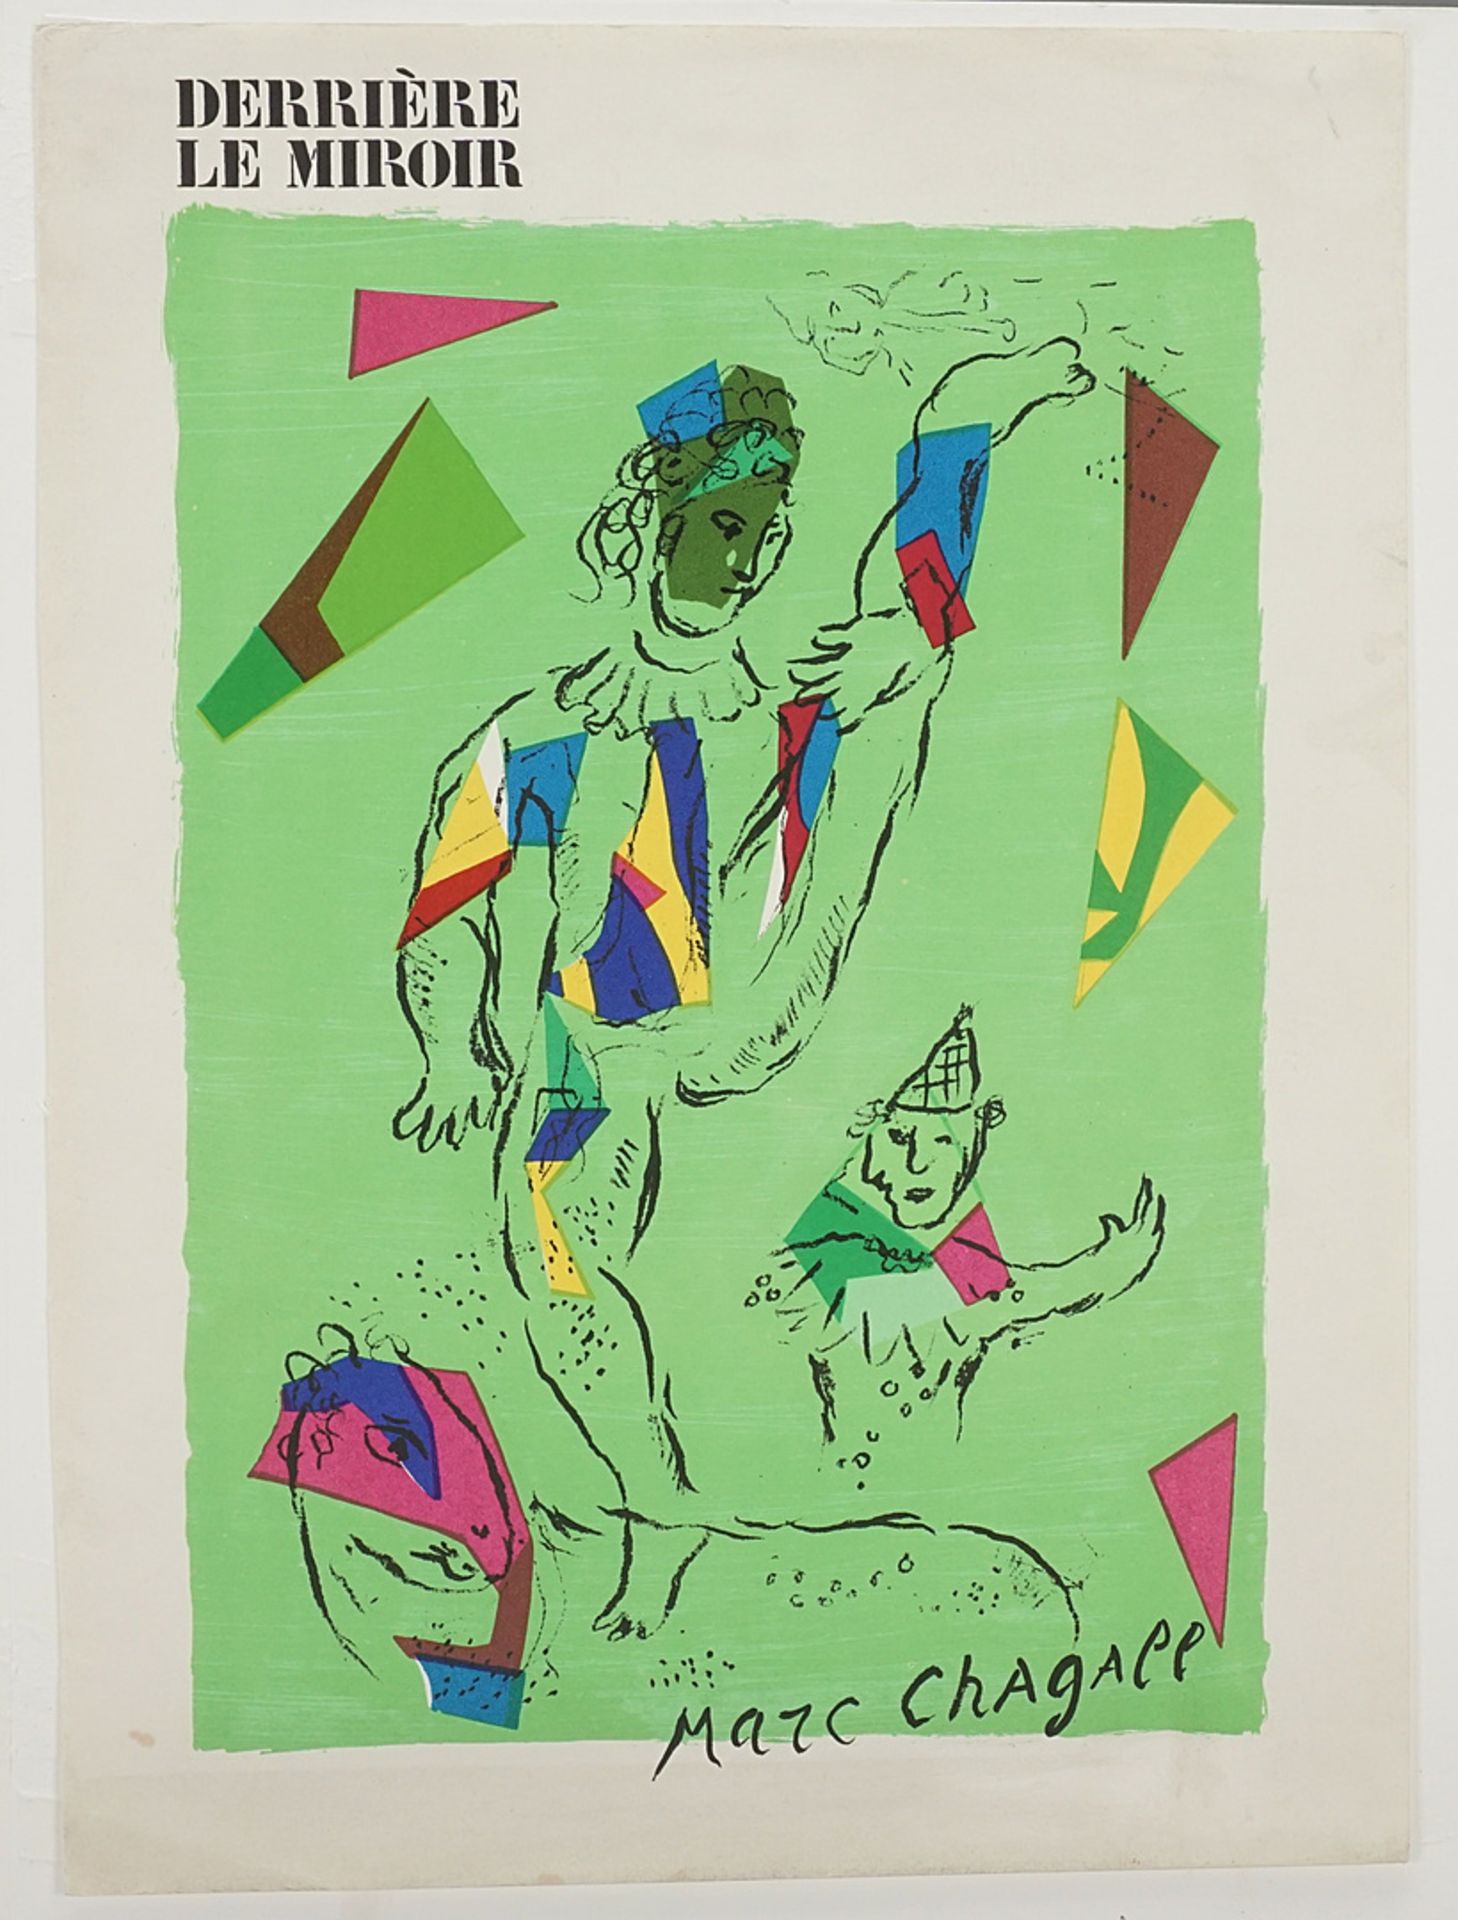 Marc Chagall (1887-1985), "L'Acrobate vert" (The Green Acrobat) - Image 3 of 4